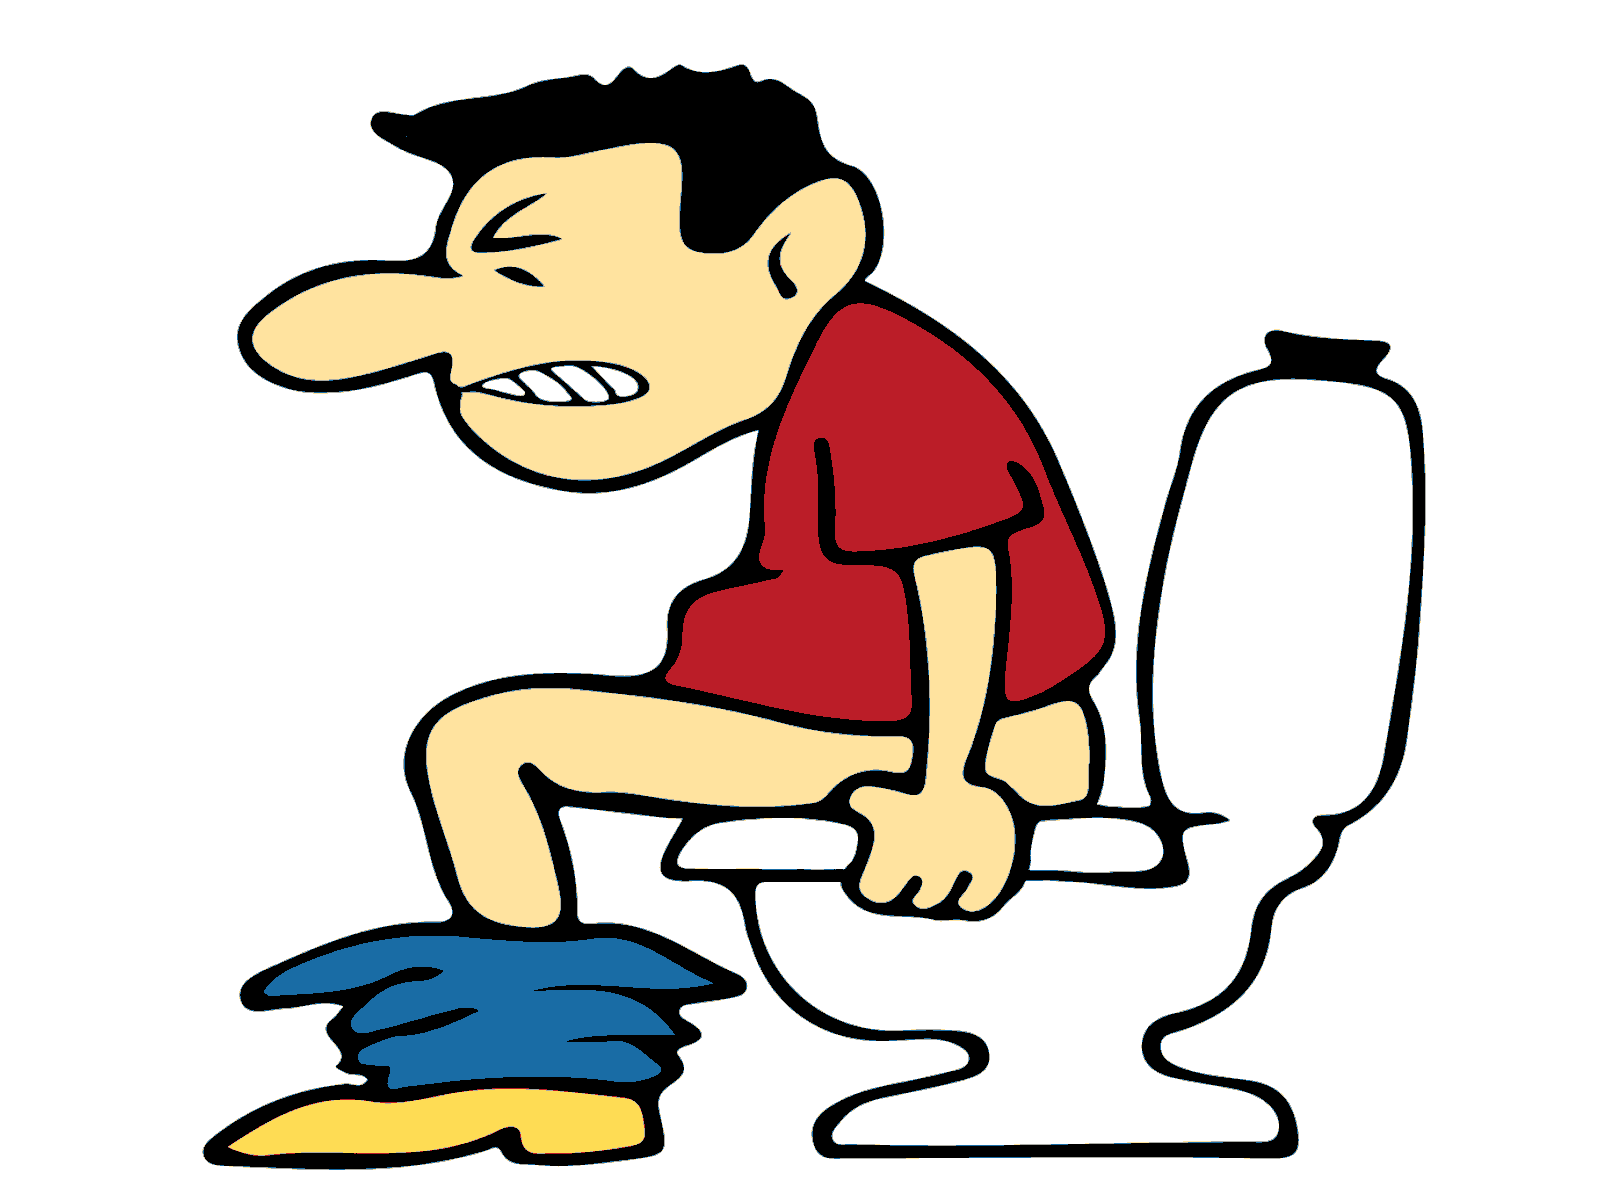 Painful Defecation by Andi on Dribbble